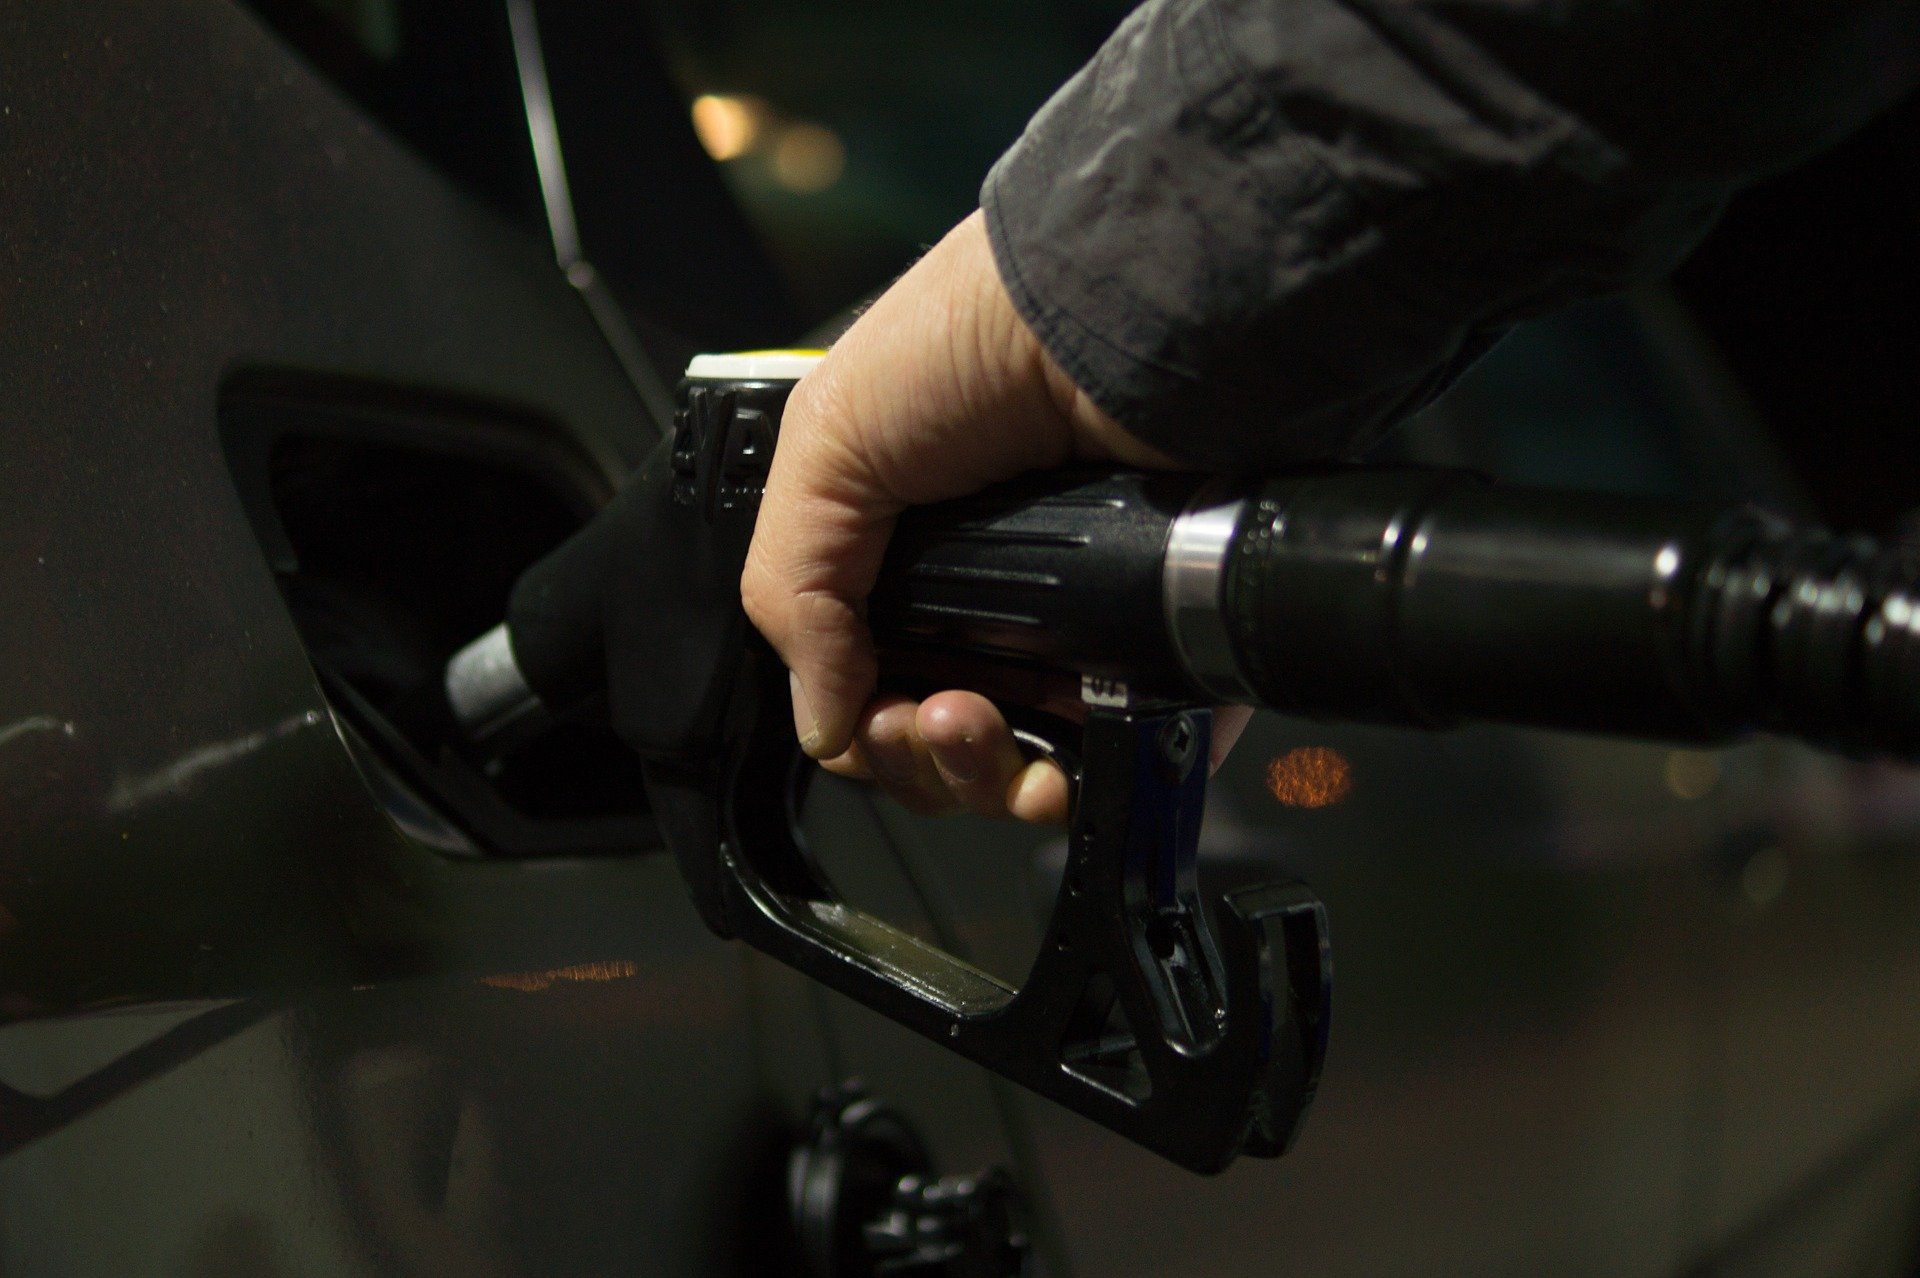 Fuel price today: Petrol and Diesel rates remain unchanged on April 25, 2022